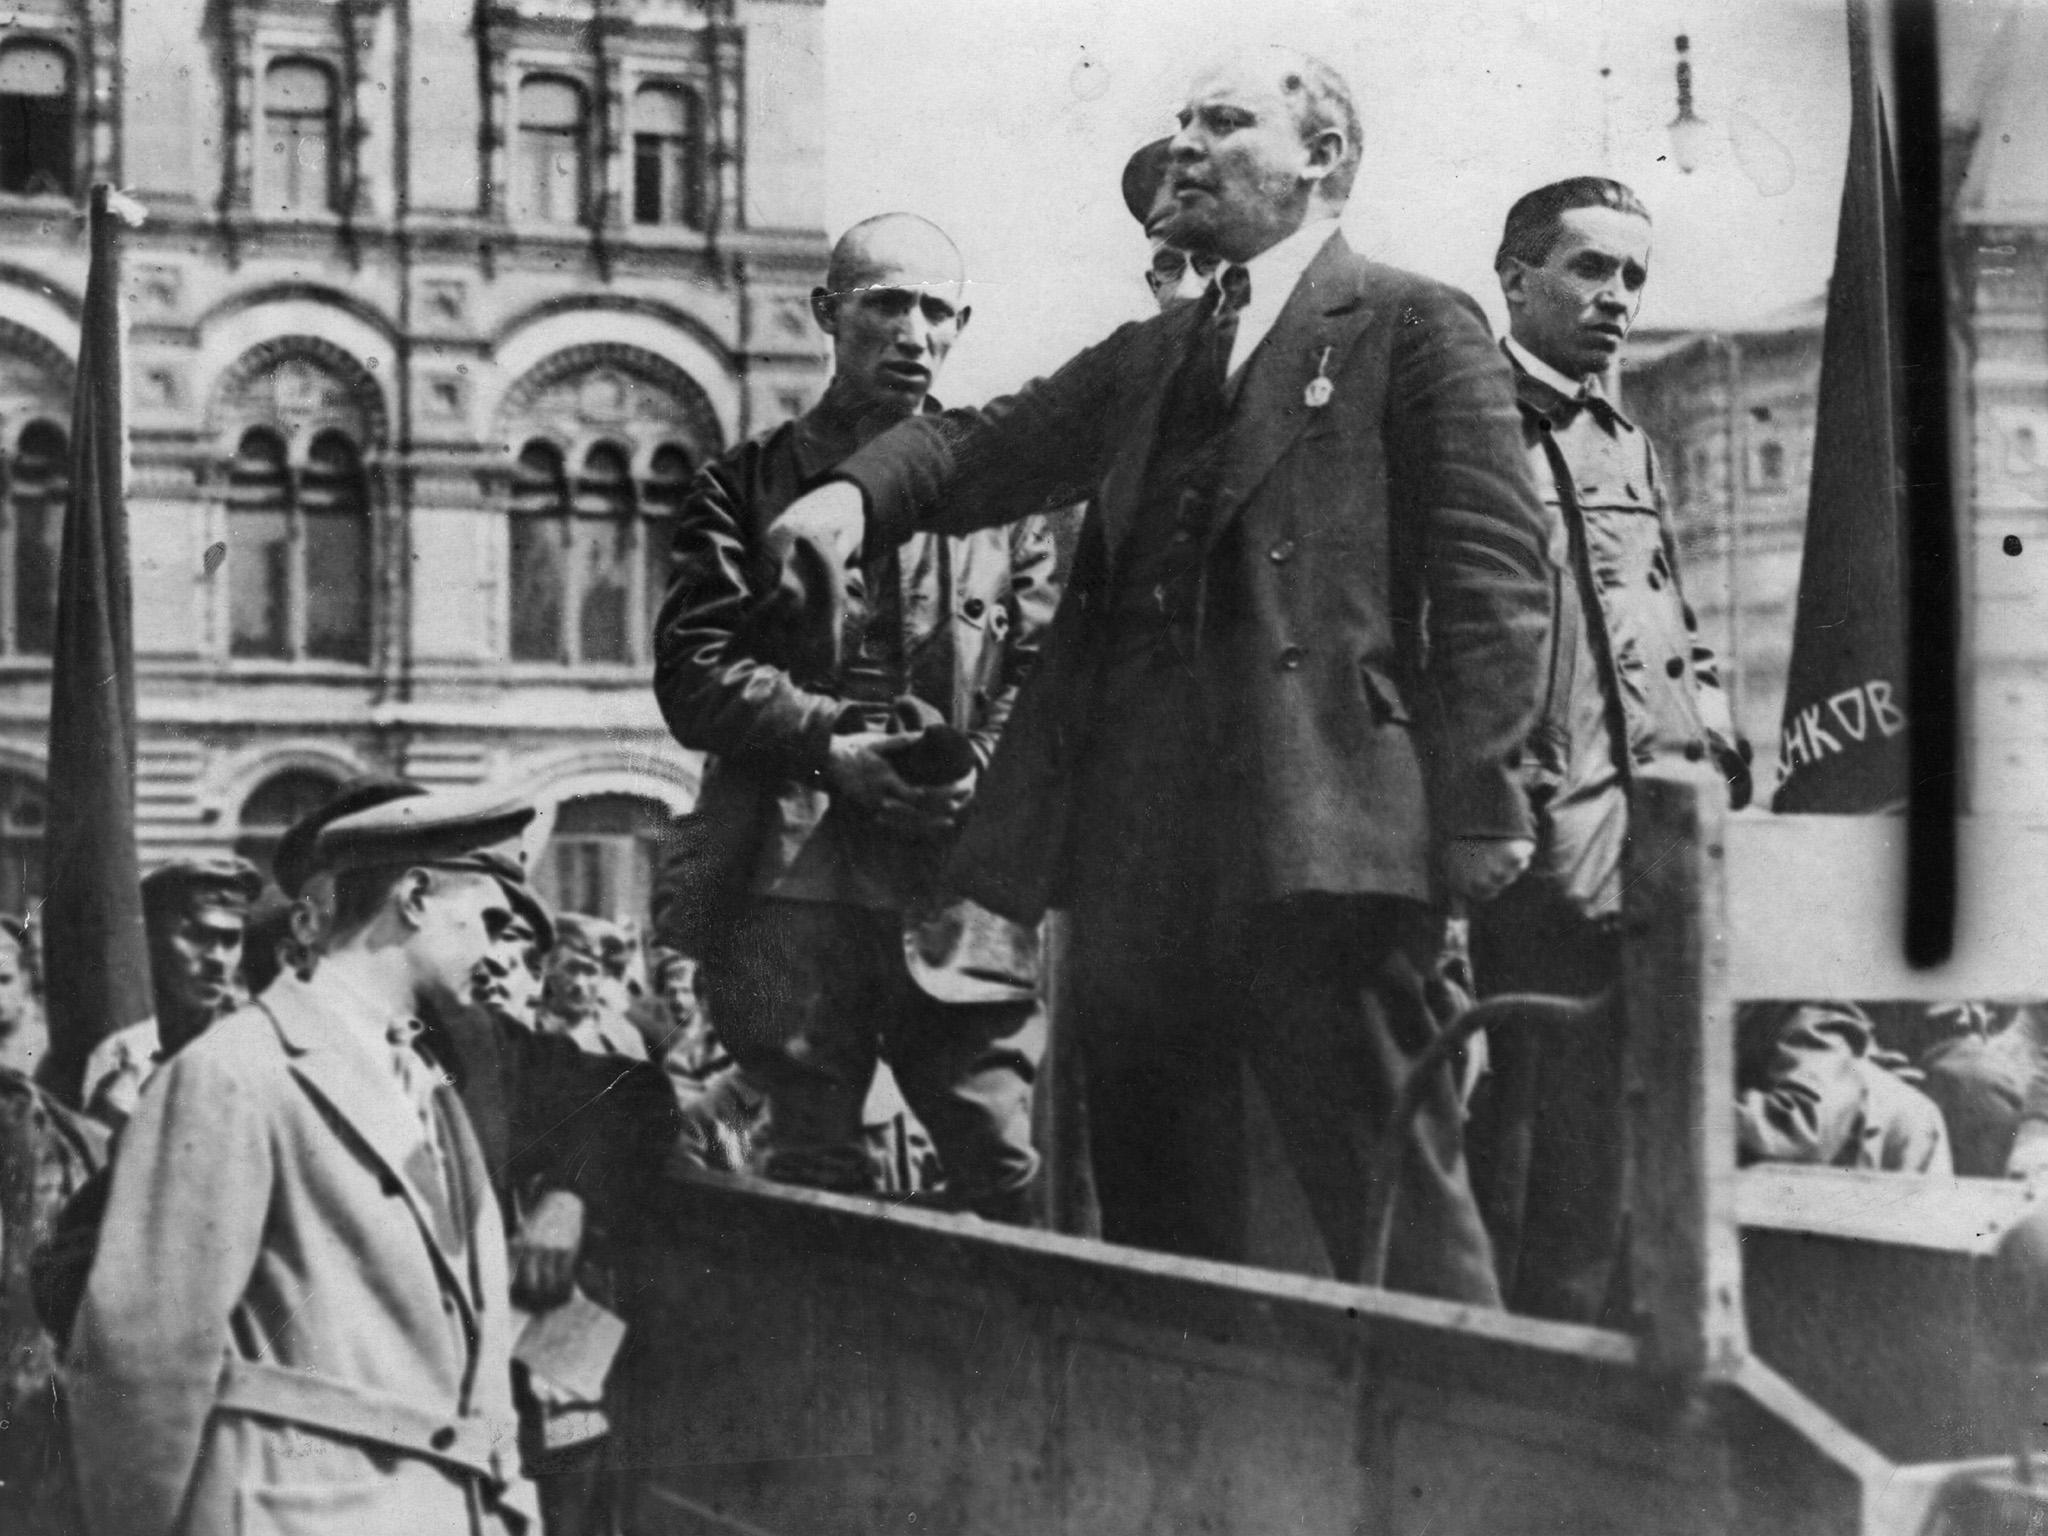 Lenin's legacy – and that of the uprising he kickstarted – is still the subject of debate